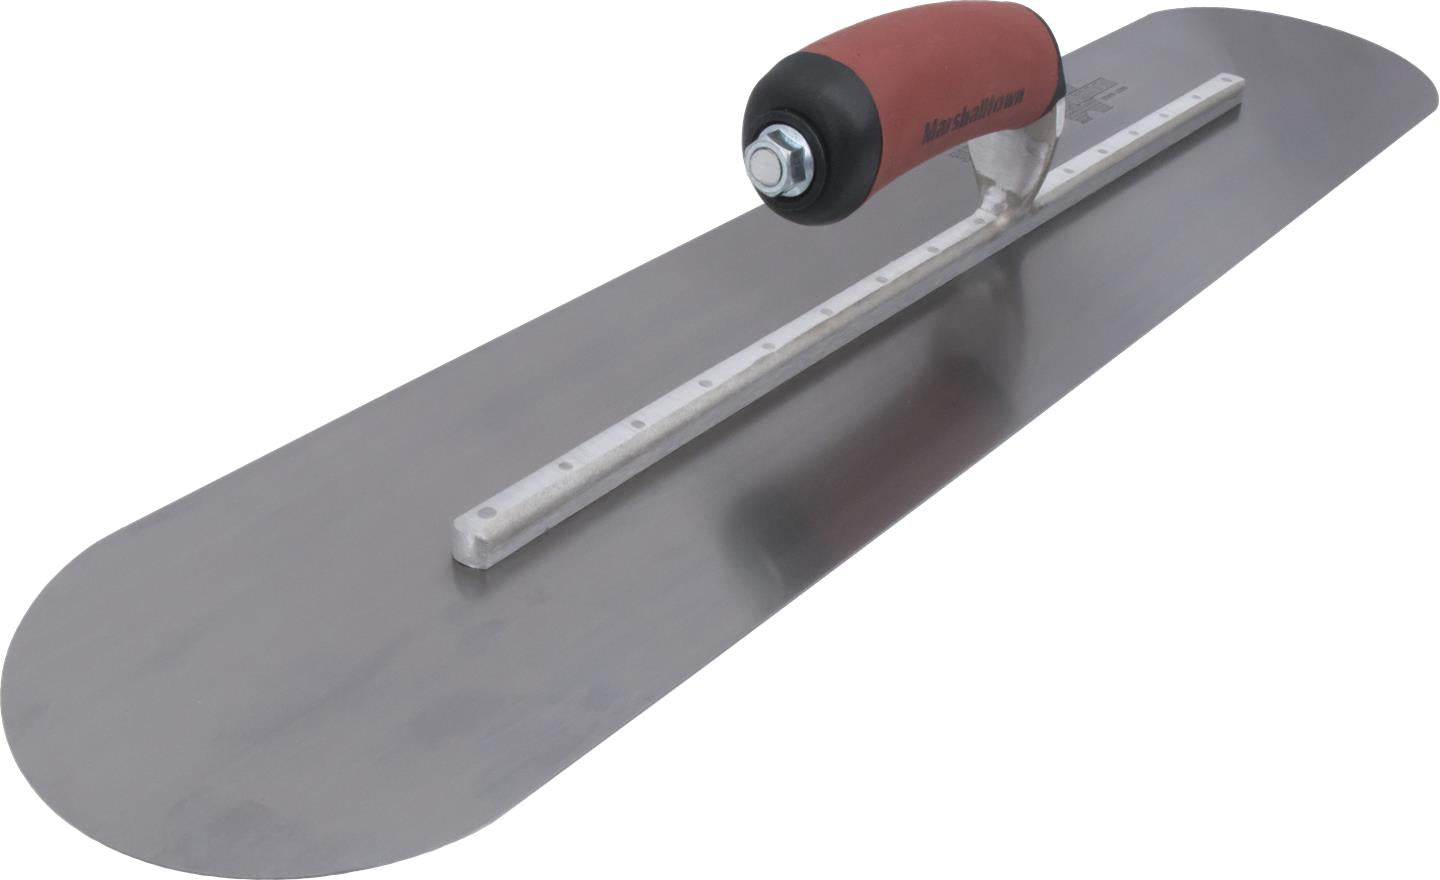 Marshalltown 12229 Concrete 24 X 4 Finishing Trowel-Fully Rounded Curved DuraSoft Handle